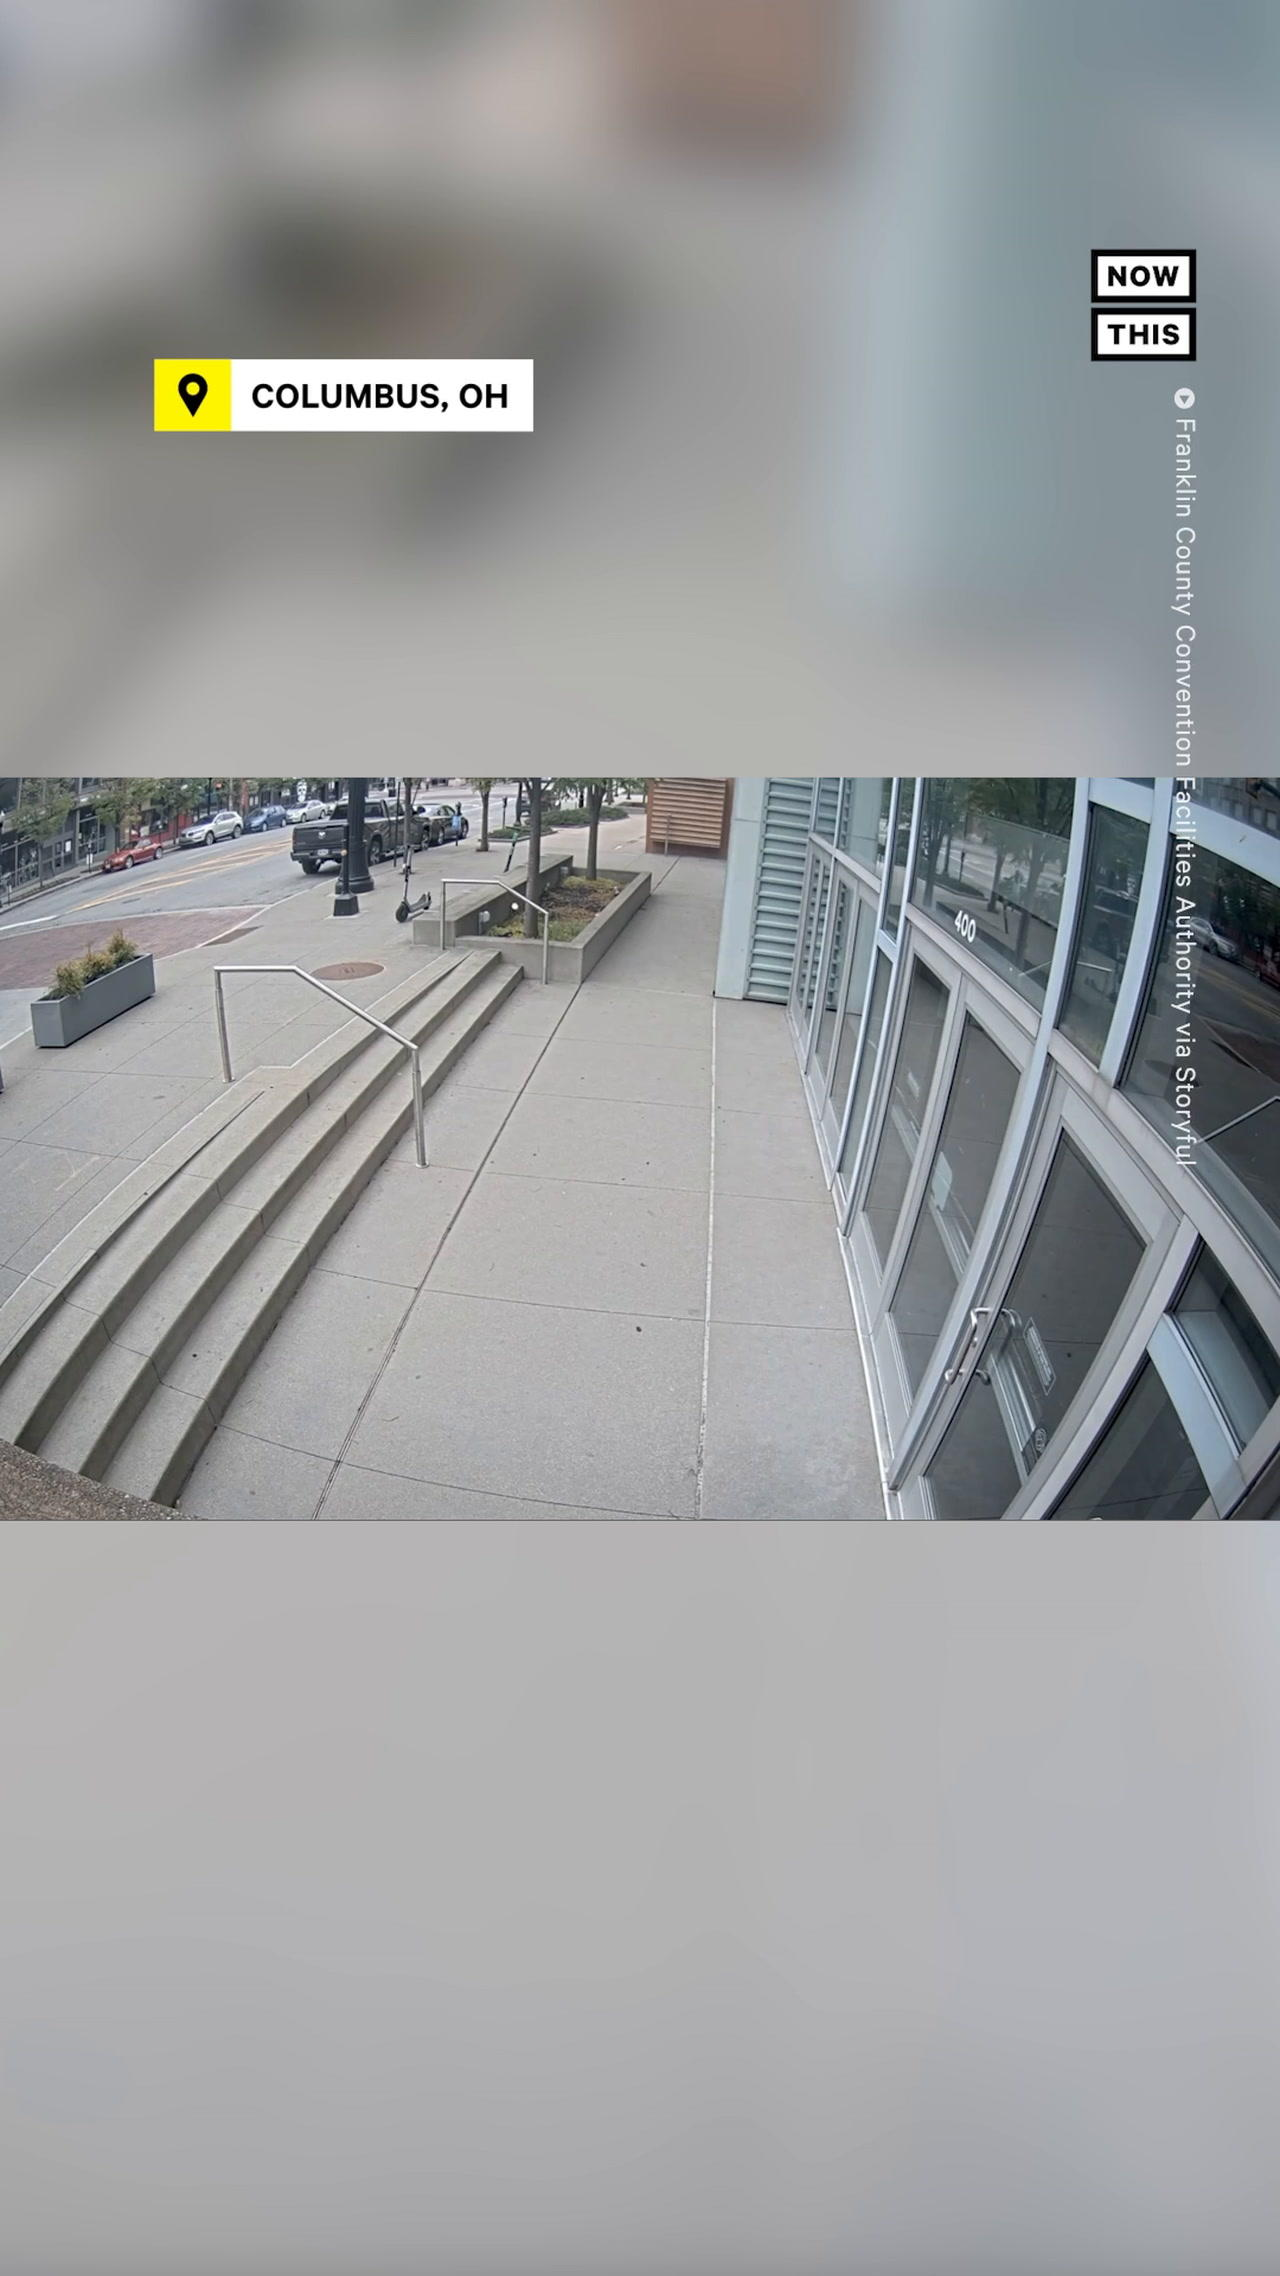 Tesla Crashes Into Convention Center, Causes $250k+ in Damages